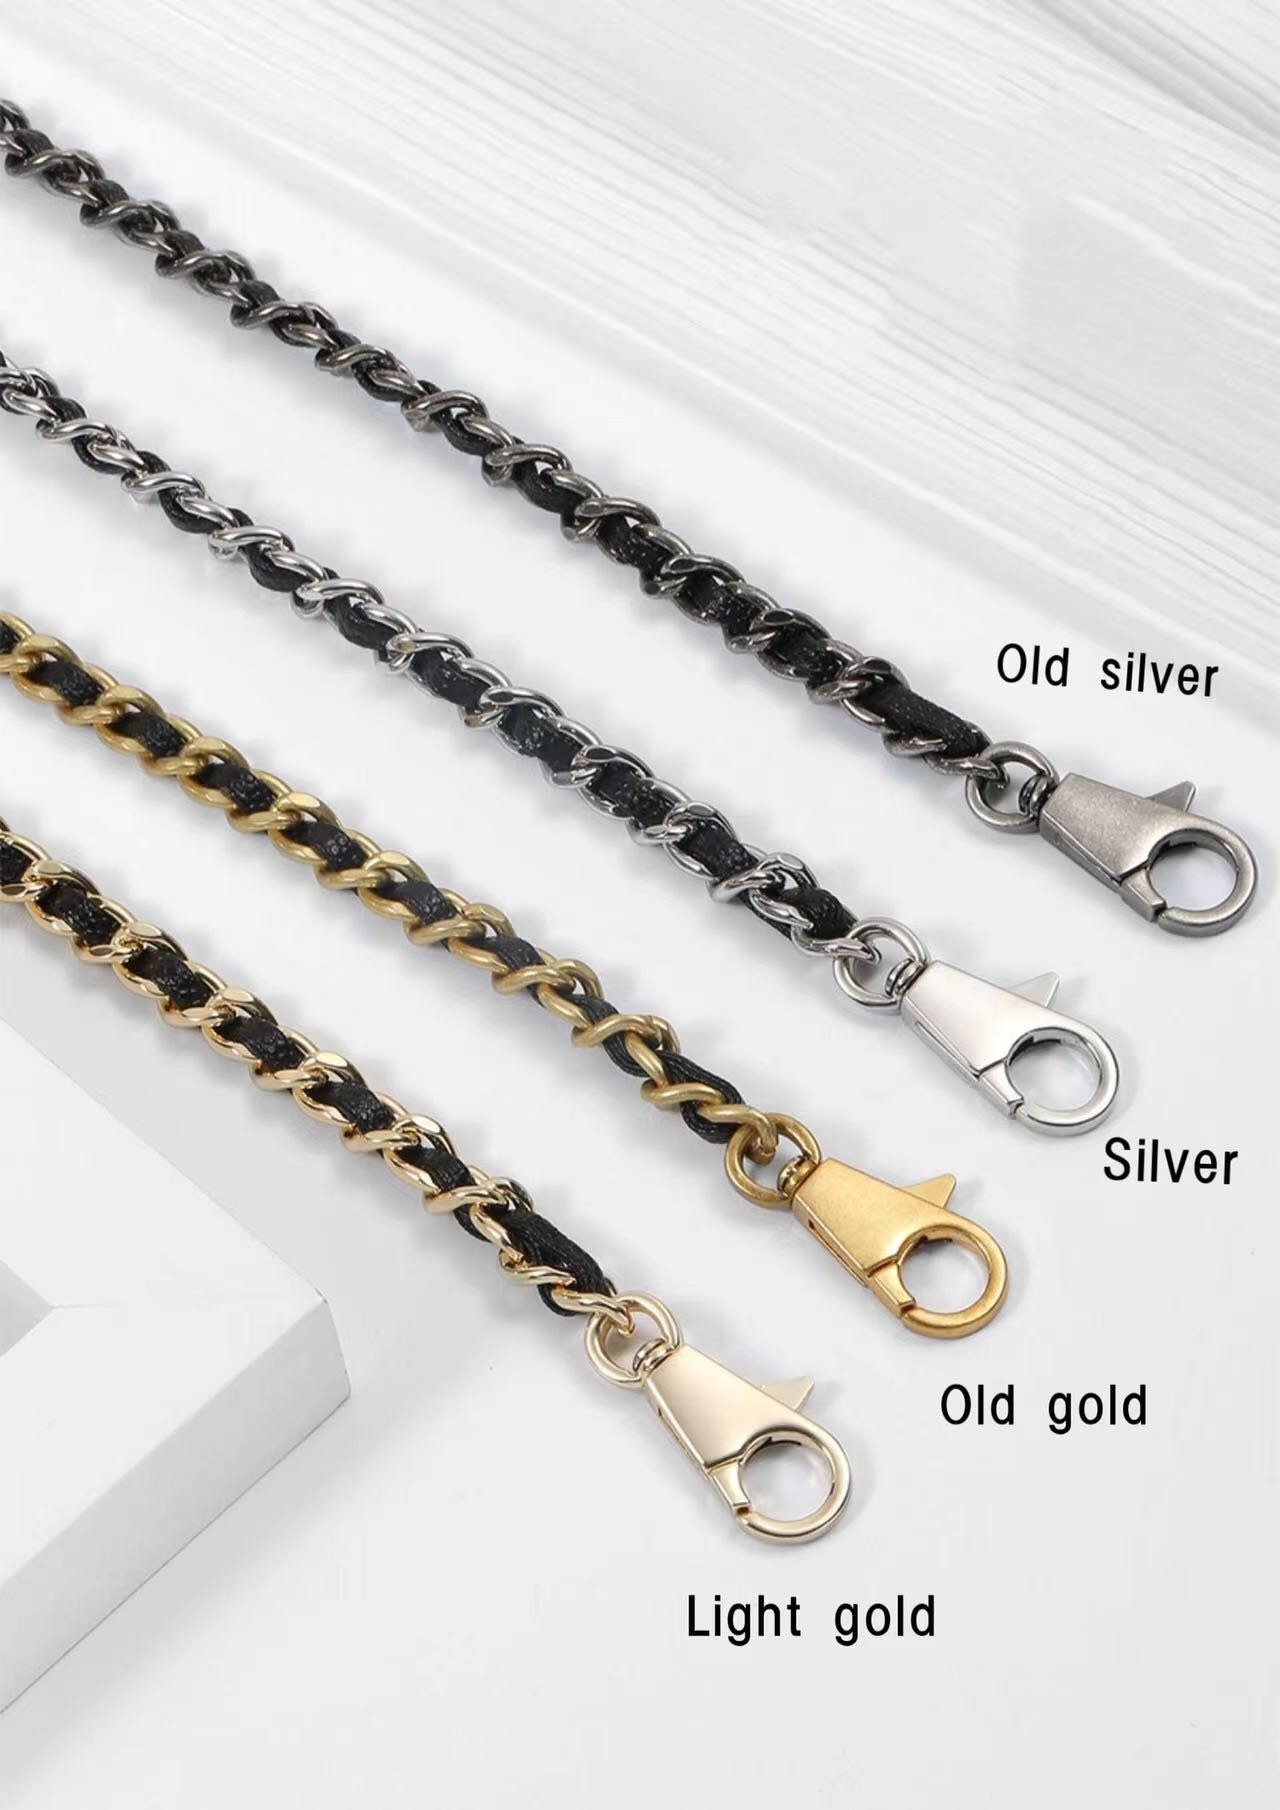 3 Pcs Gold Chain for Purse, Gold Chain for Purse Strap Crossbody Different  Sizes, Flat Iron Chains with Metal Buckles Chain Extender for Replacement